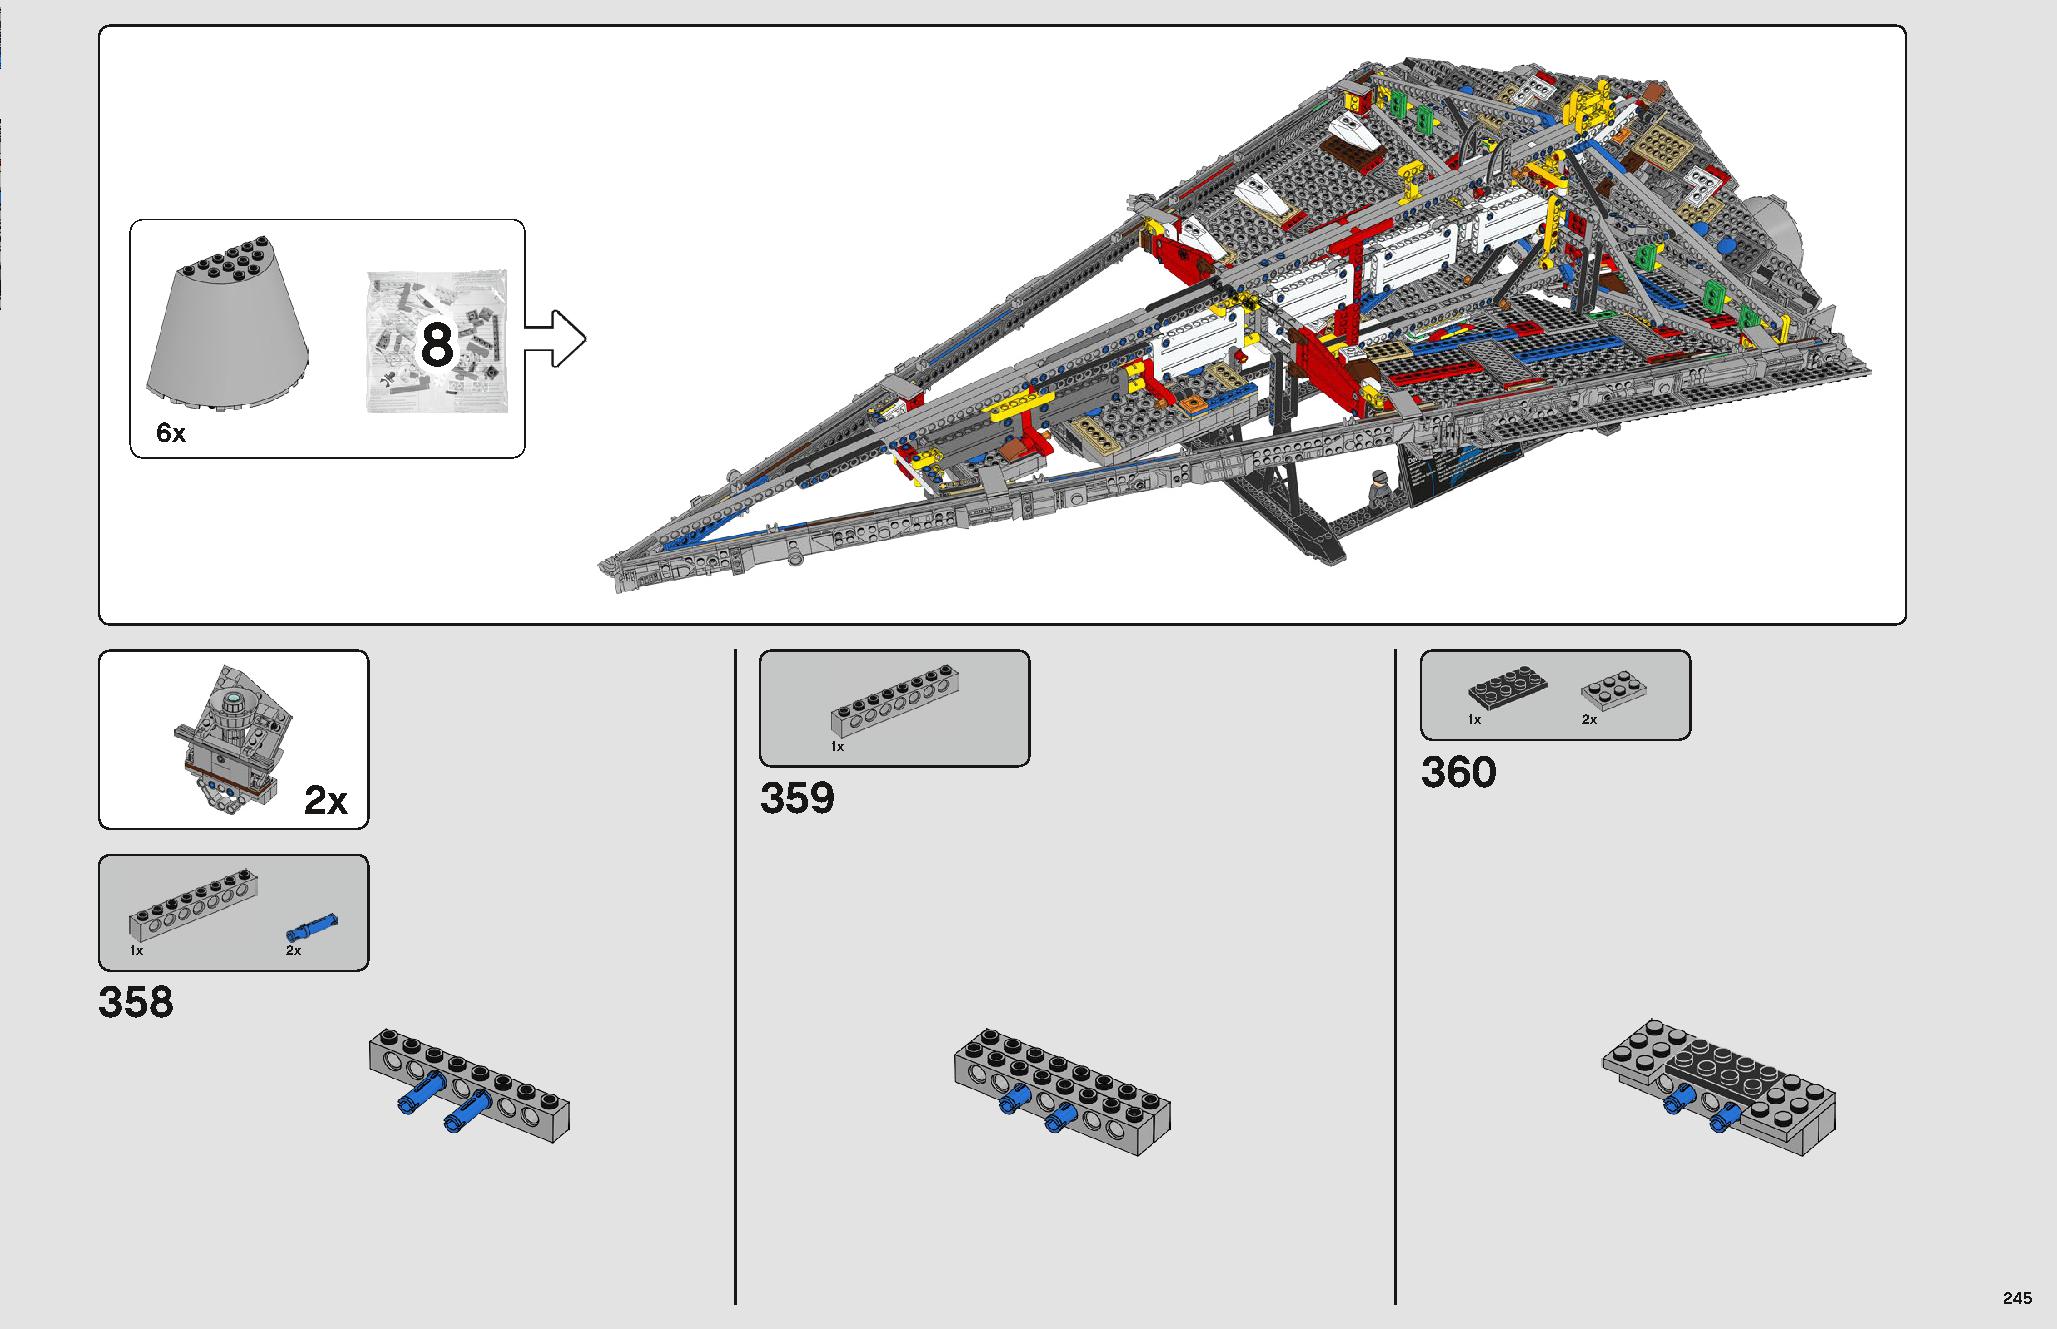 Imperial Star Destroyer 75252 レゴの商品情報 レゴの説明書・組立方法 245 page